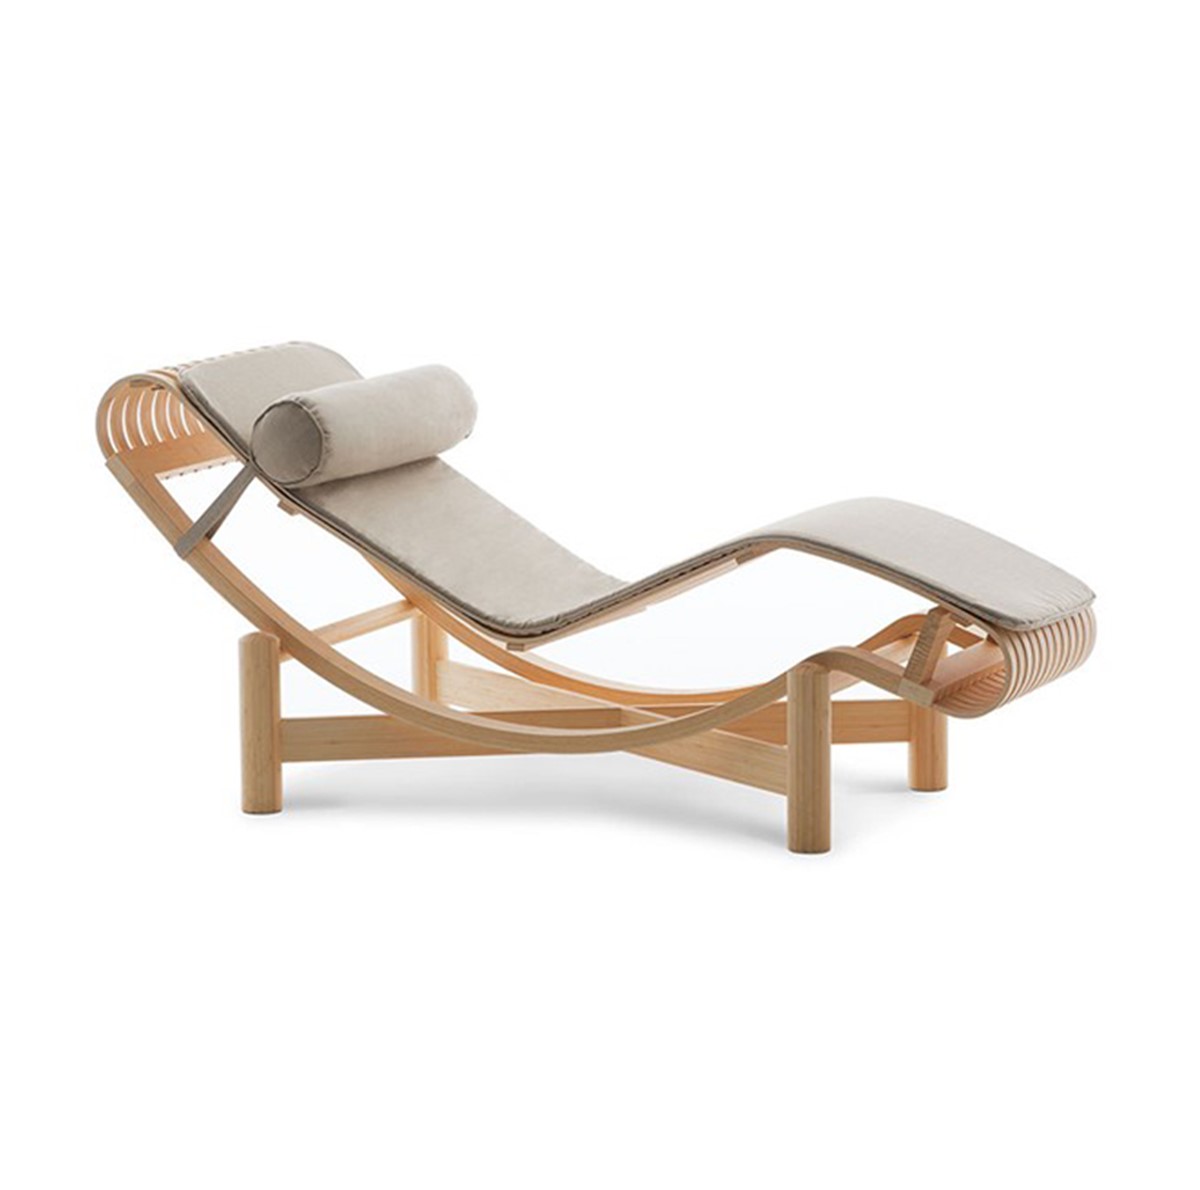 Cassina-Charlotte-Perriand-Tokyo-Chaise-Longue-Outdoor-Matisse-1